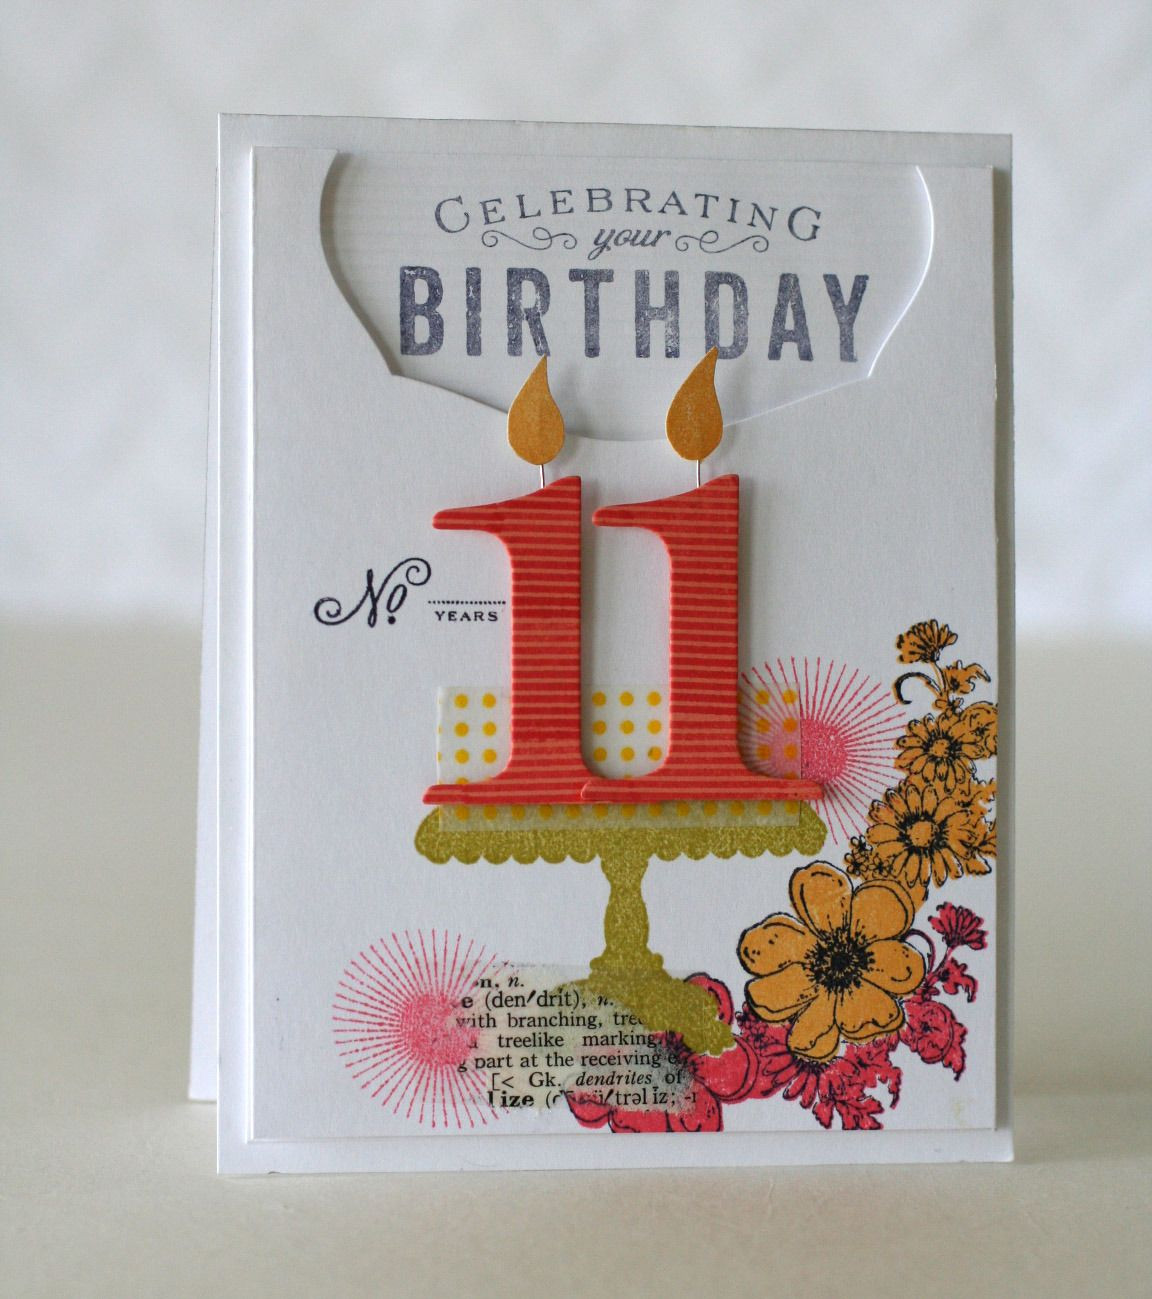 11 Year Old Birthday Gift Ideas
 Handmade Card For Your Love 11 Year Old Girl Birthday